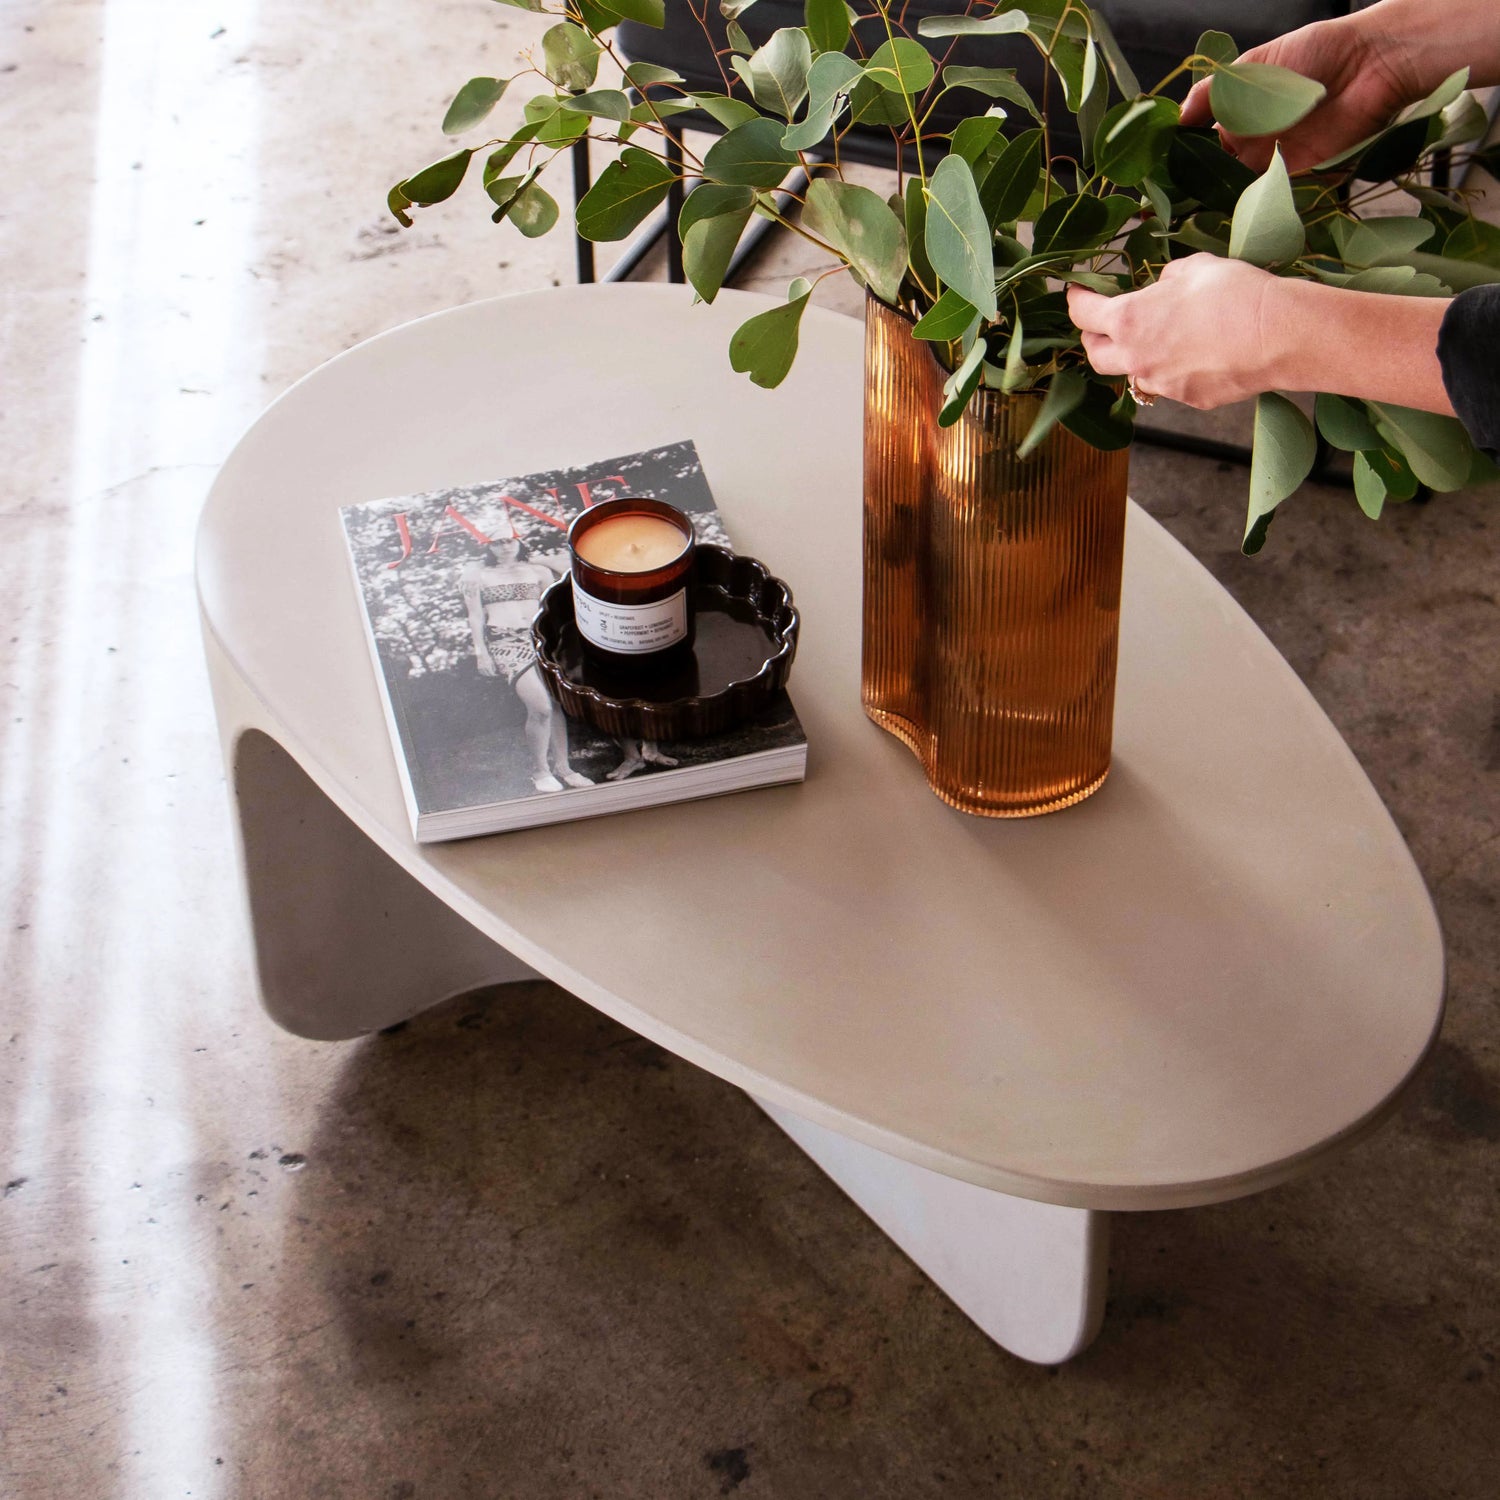 A top view of the curves of the Riviera Concrete Coffee Table with two hands adjusting flowers in a vase.